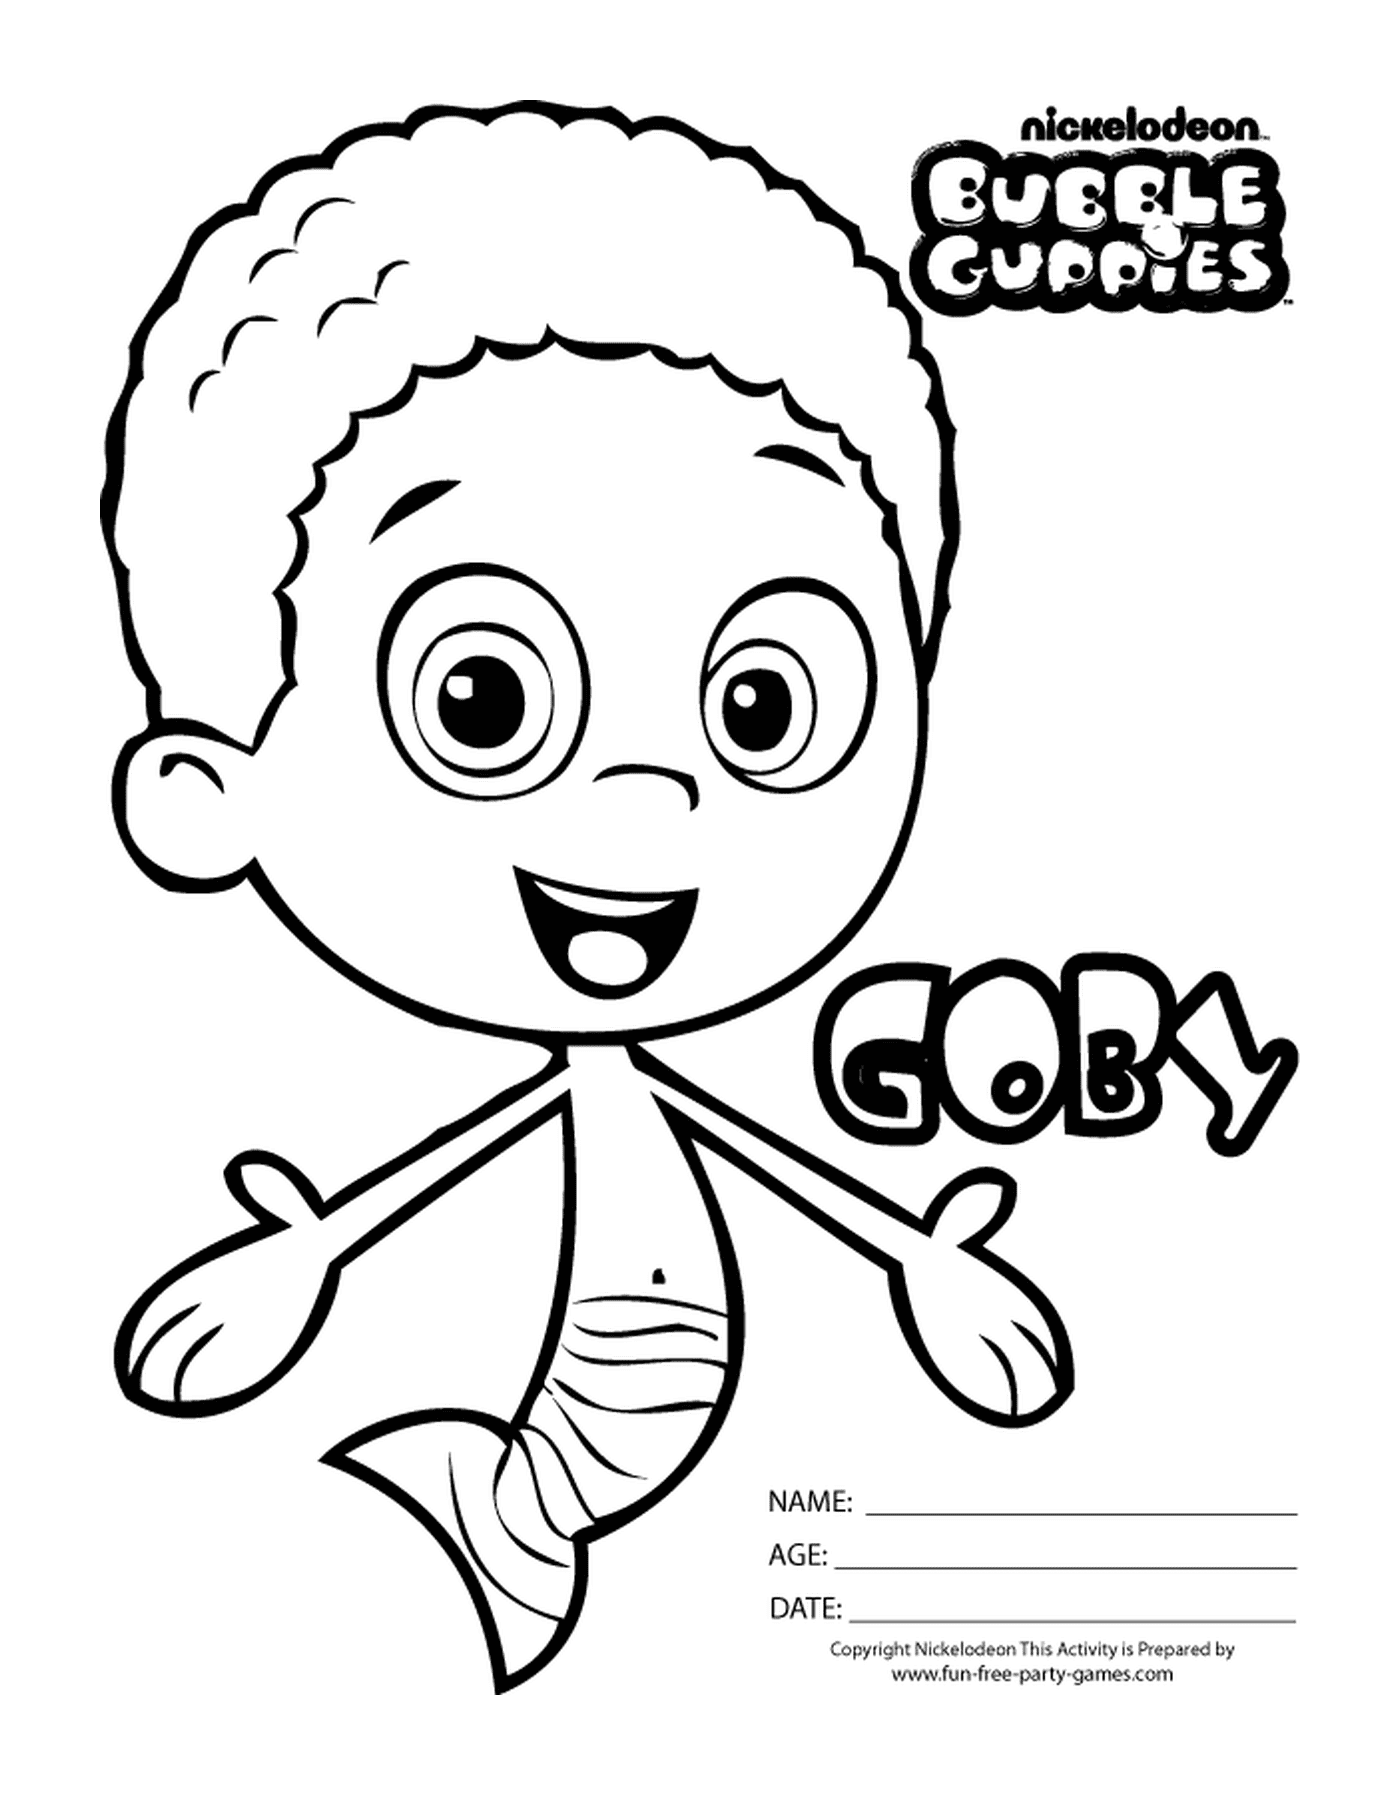 coloriage Bubble Guppies Goby